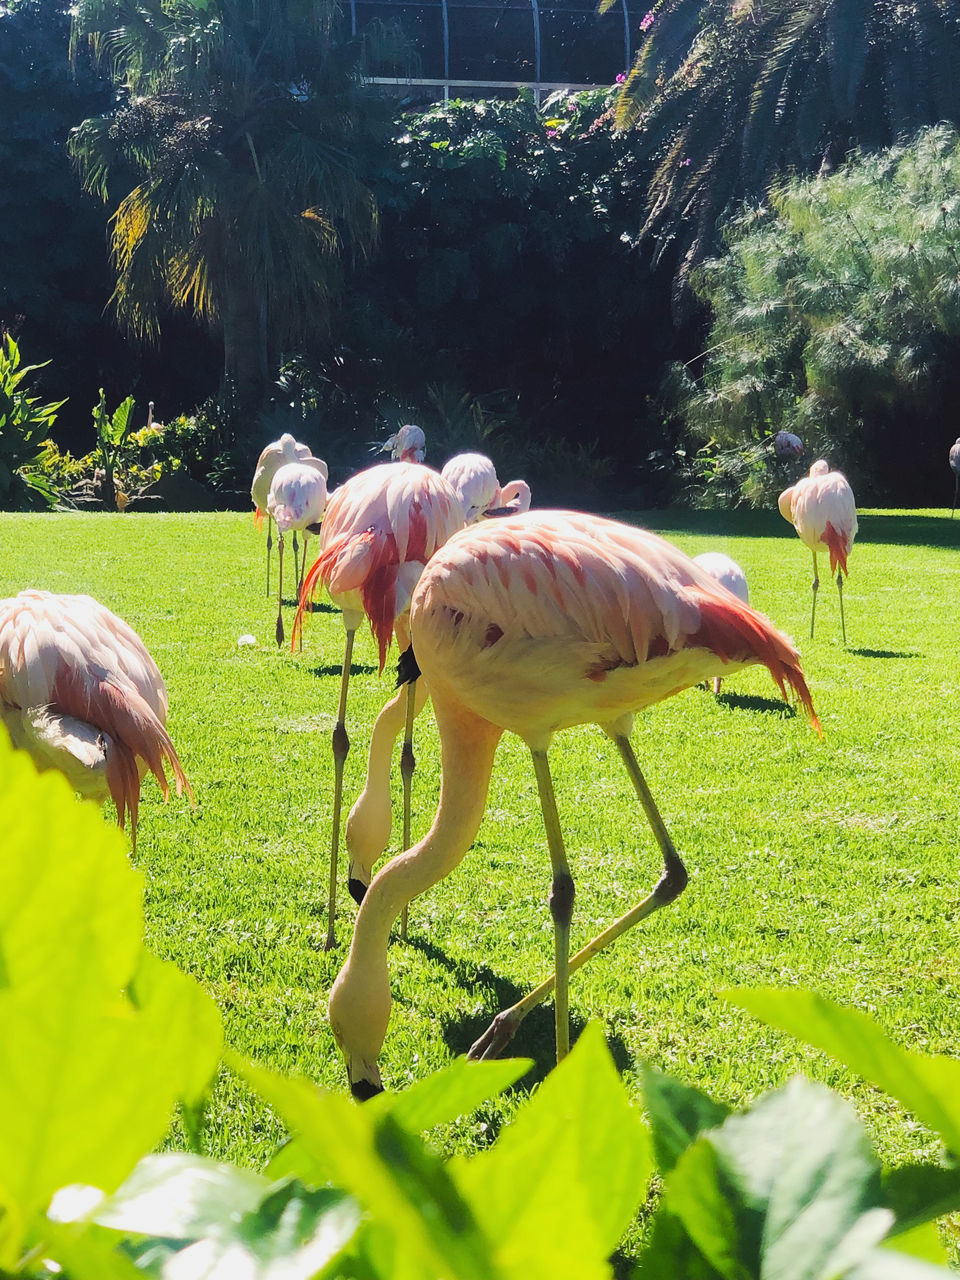 animal, animal themes, animal wildlife, group of animals, wildlife, bird, plant, nature, flamingo, no people, grass, day, green, beauty in nature, land, sunlight, outdoors, water, standing, field, tree, mammal, landscape, zoo